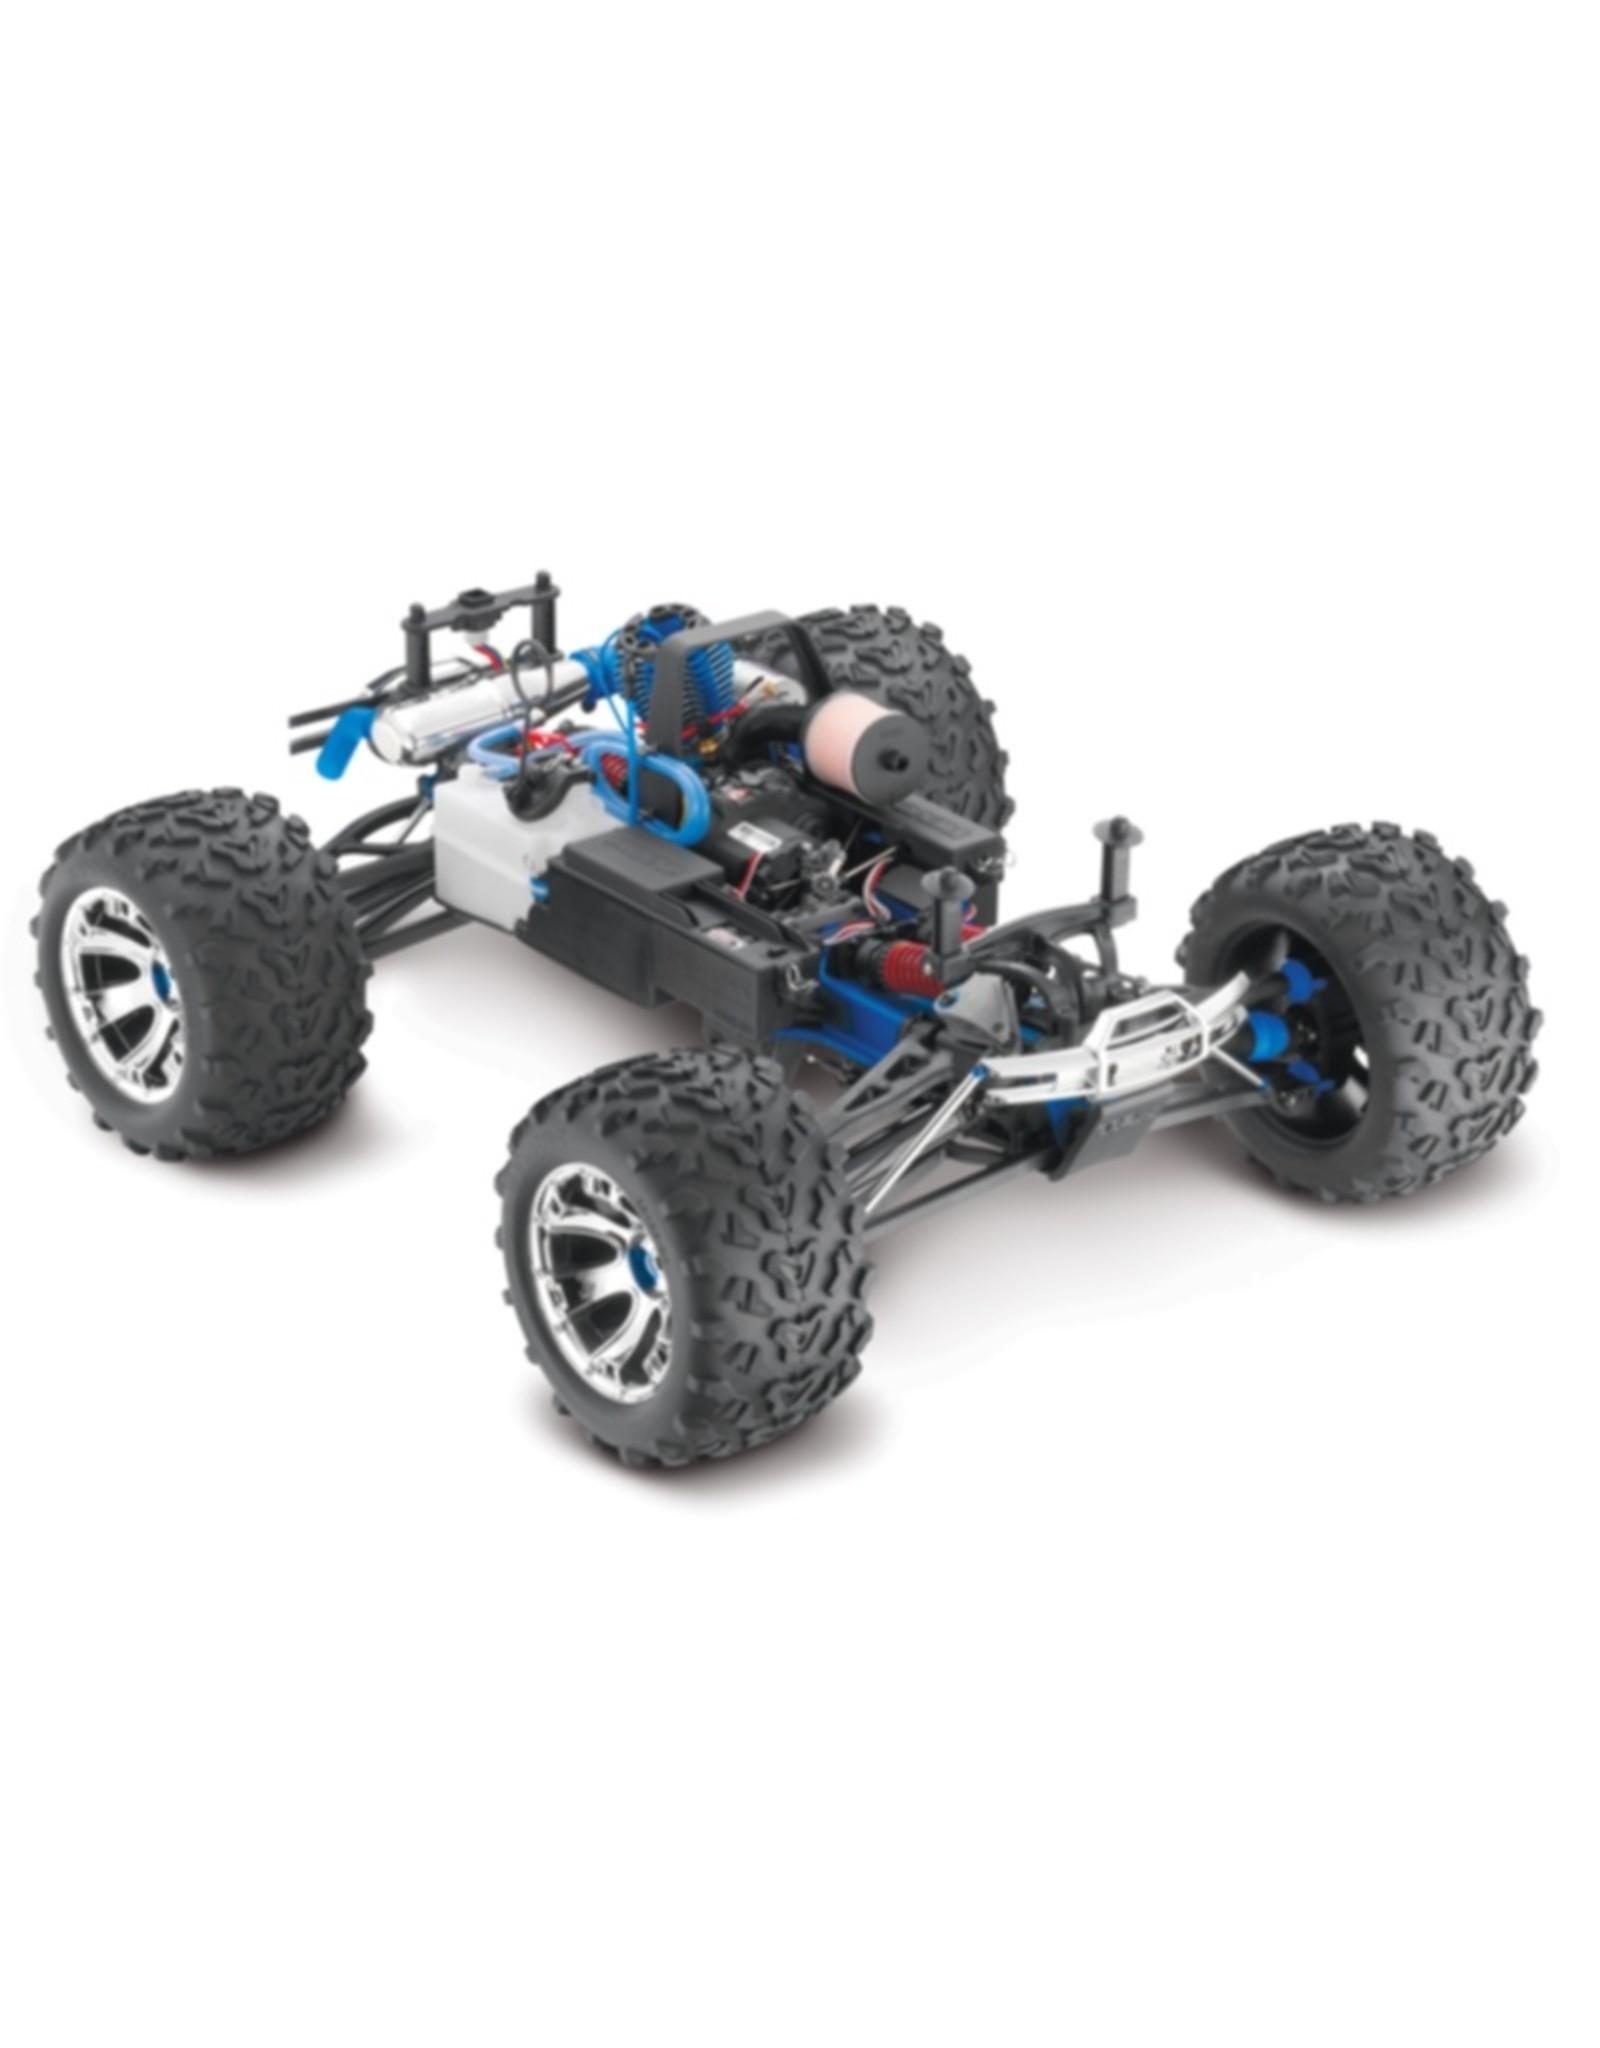 Traxxas TRA53097-blue - Revo® 3.3: 1/10 Scale 4WD Nitro-Powered Monster Truck. Ready-to-Race®